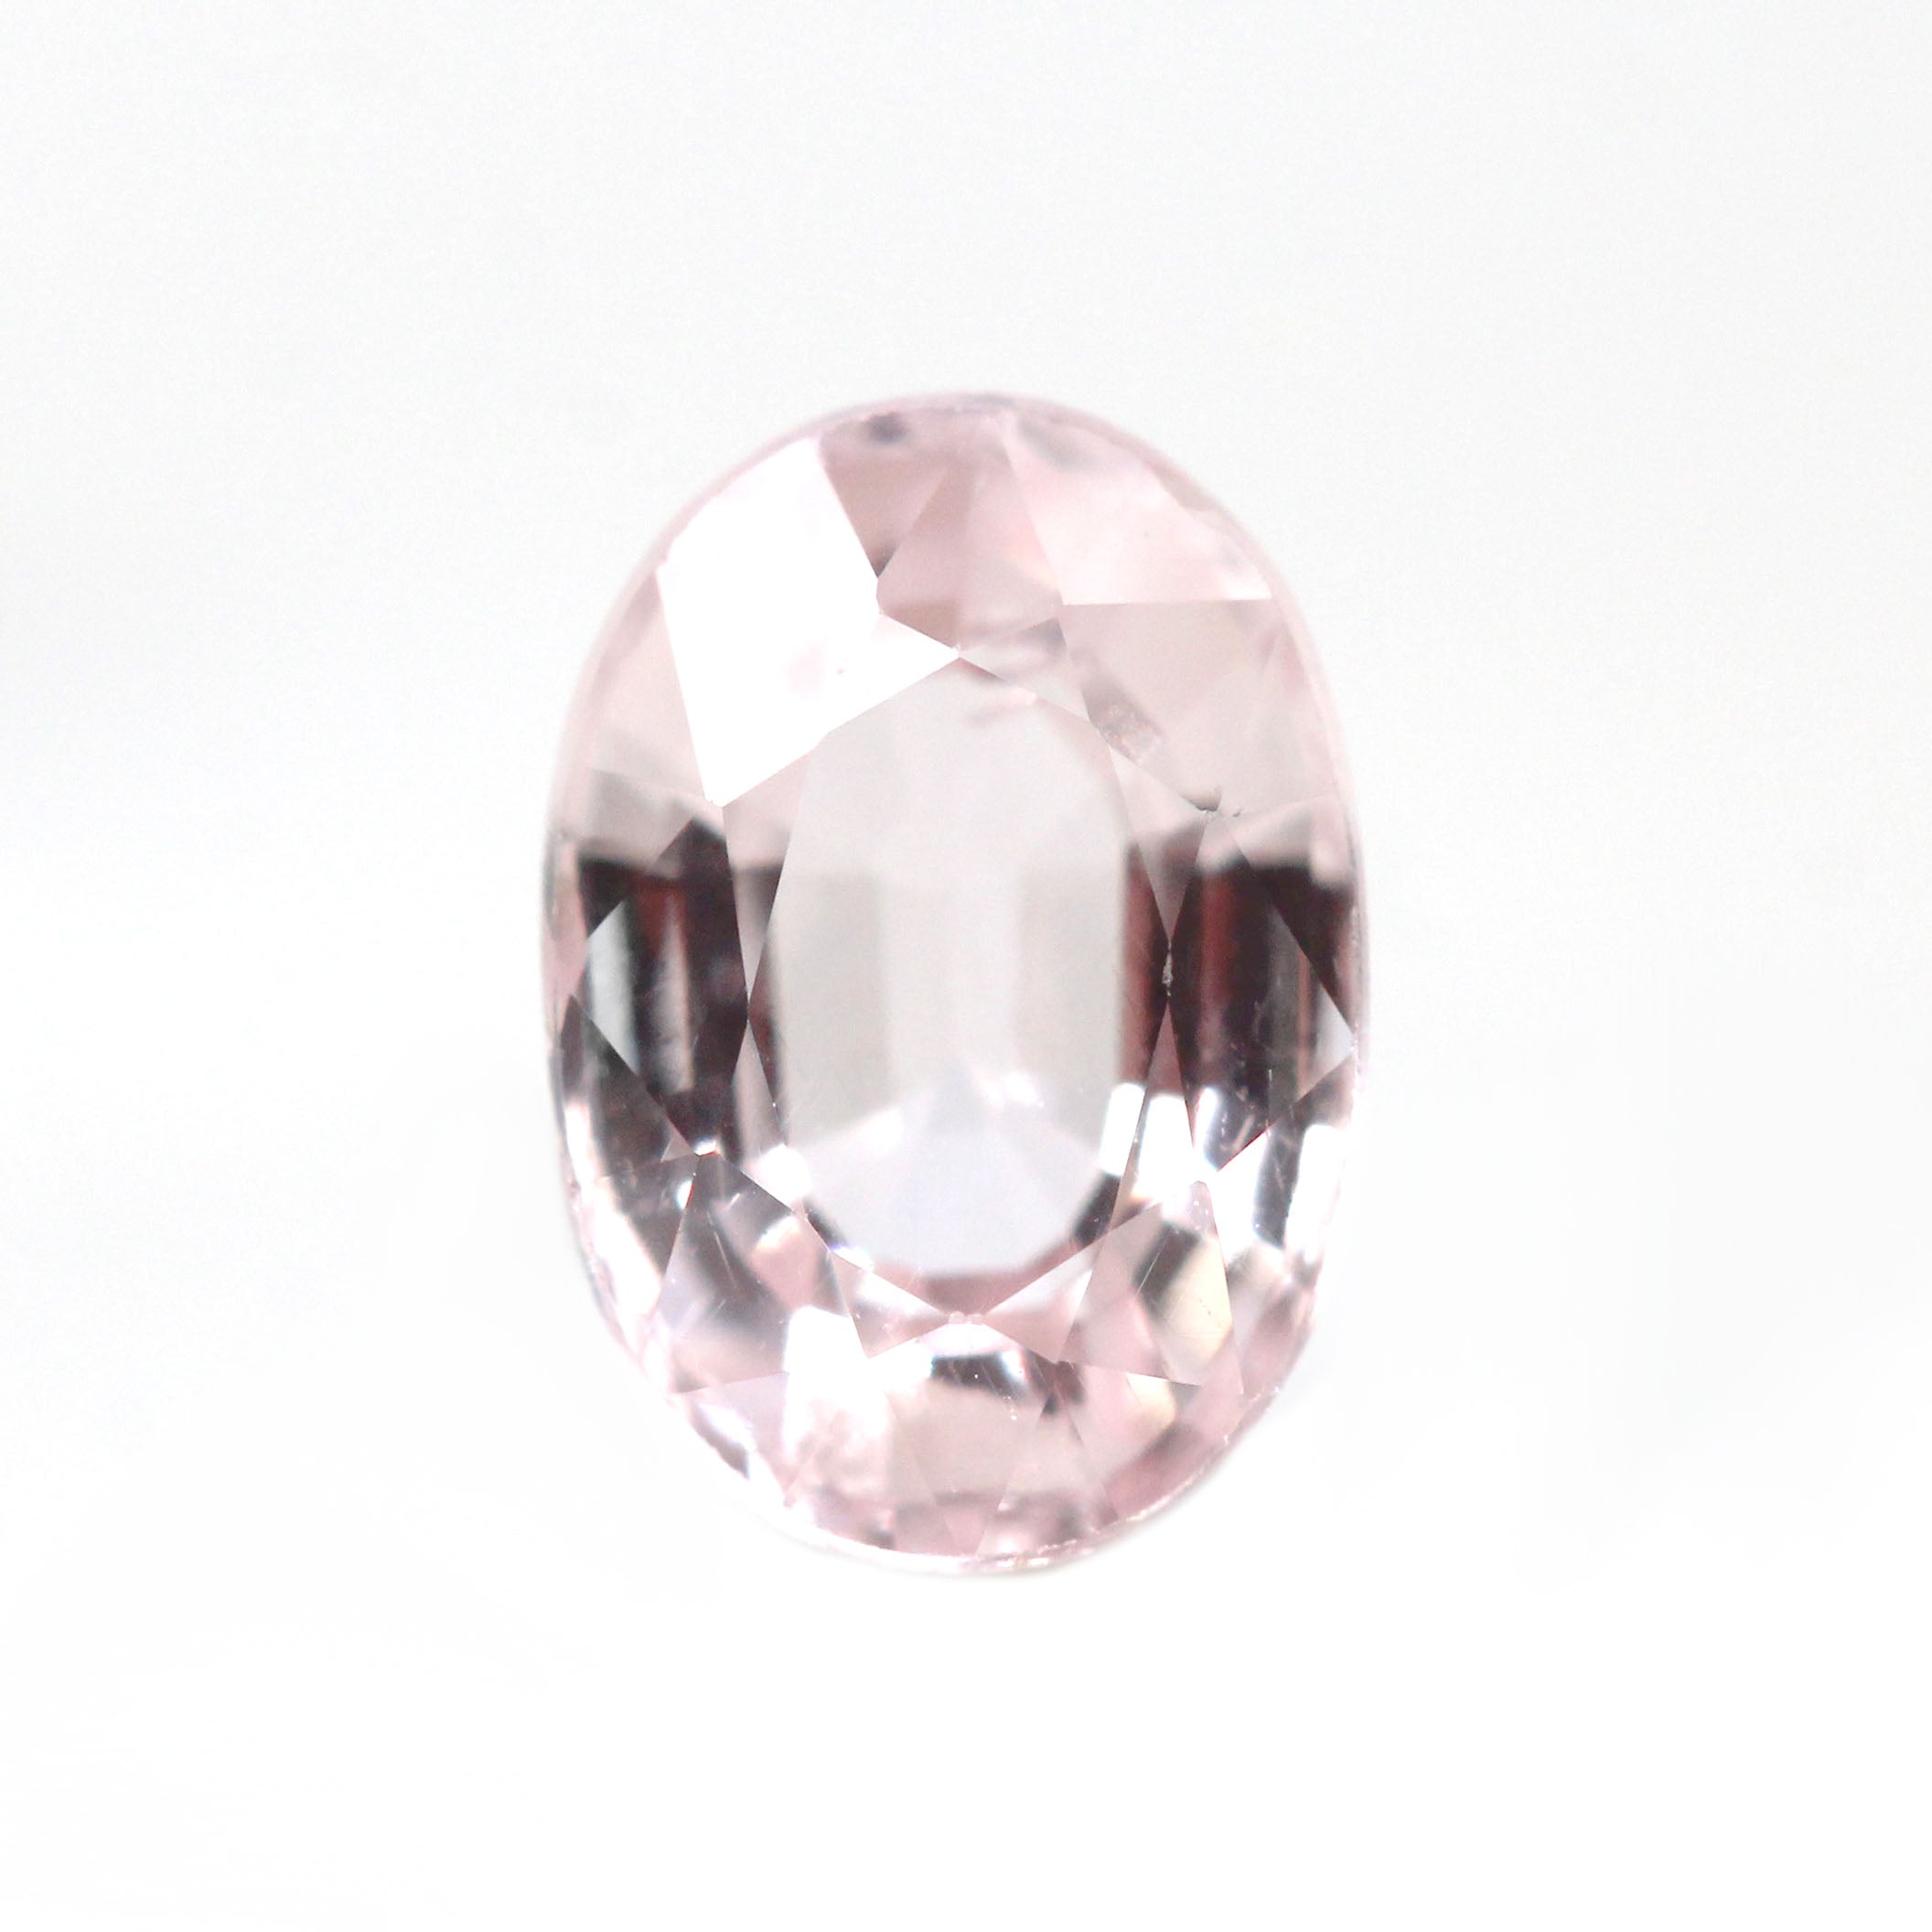 0.77 Carat Clear Light Pink Oval Montana Sapphire for Custom Work -  Inventory Code PSO077